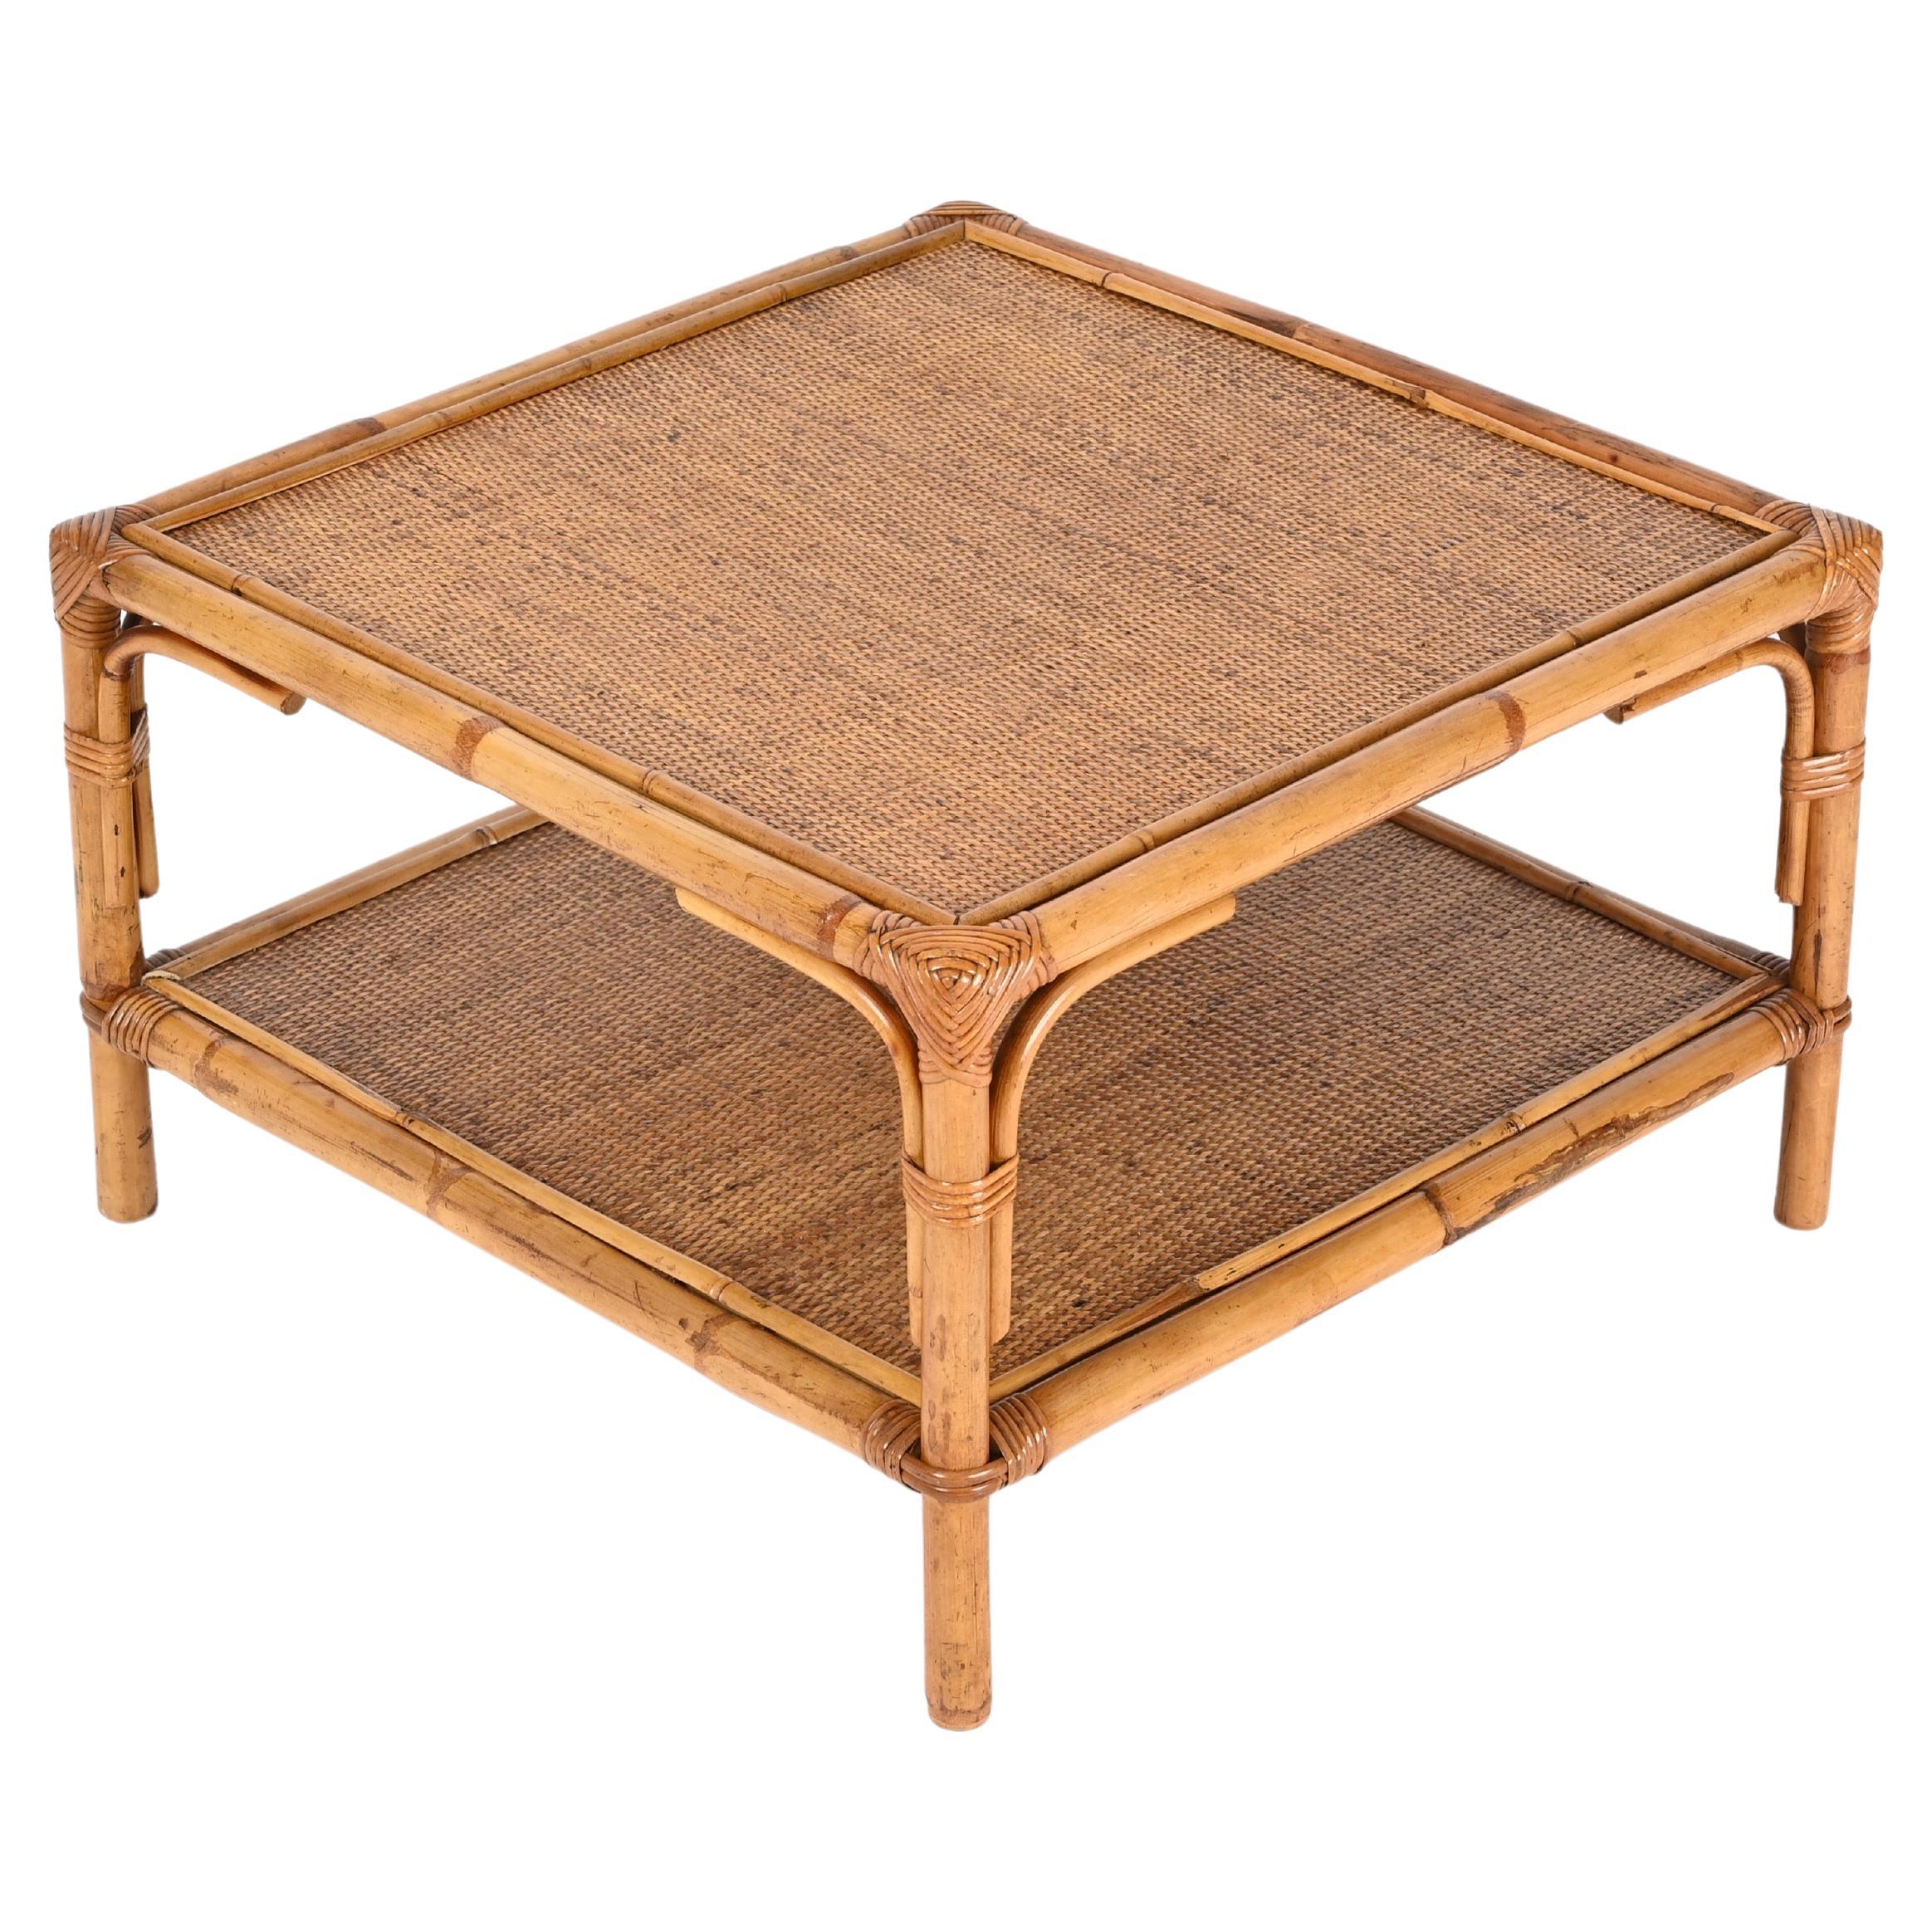 Vivai del Sud Midcentury Italian Square Coffee Table in Bamboo and Rattan, 1970s For Sale